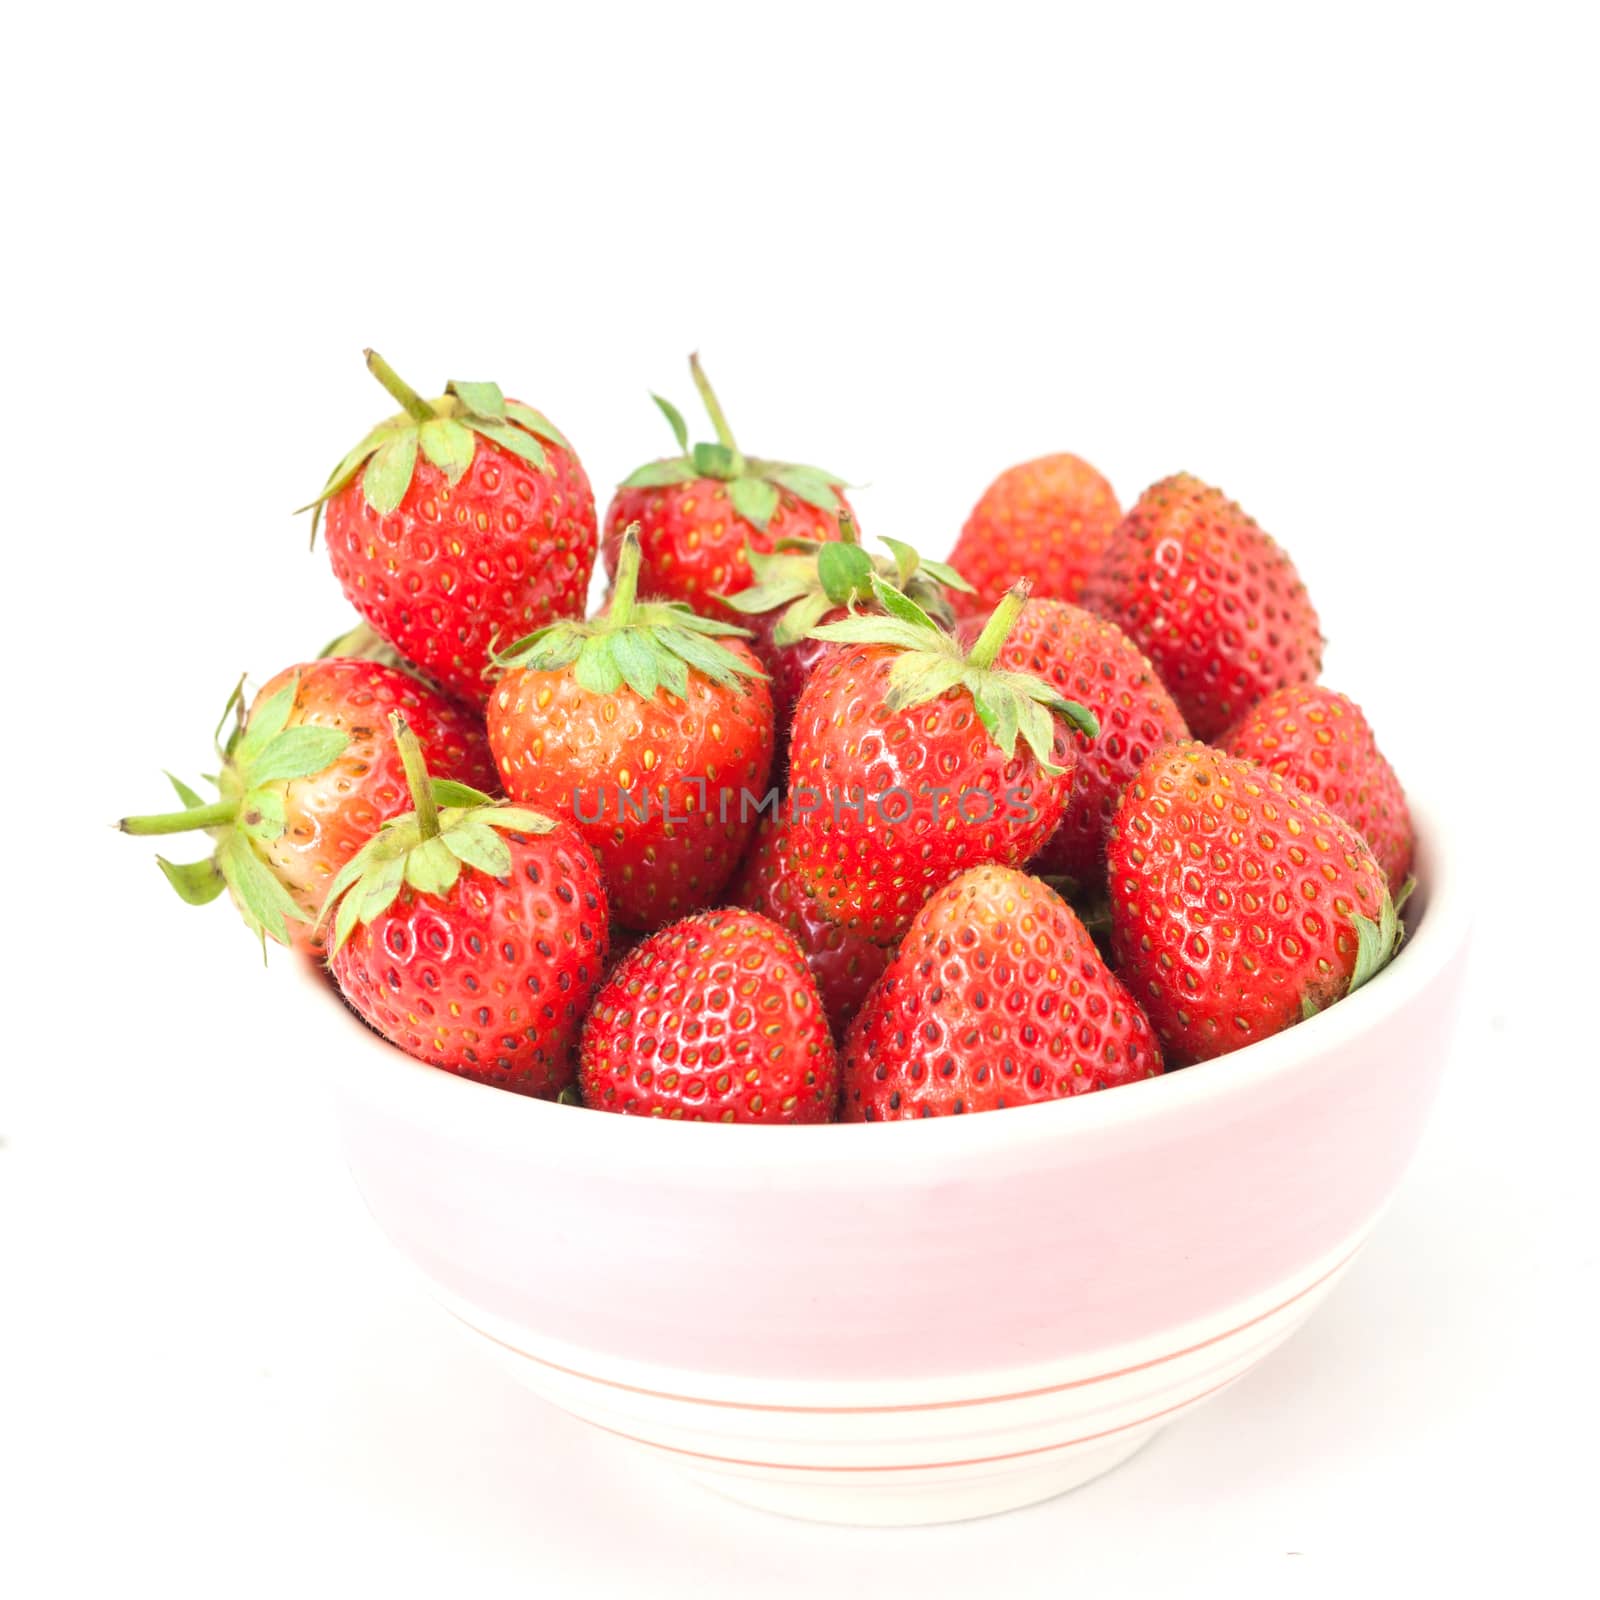 Small white bowl filled with red strawberries by nopparats